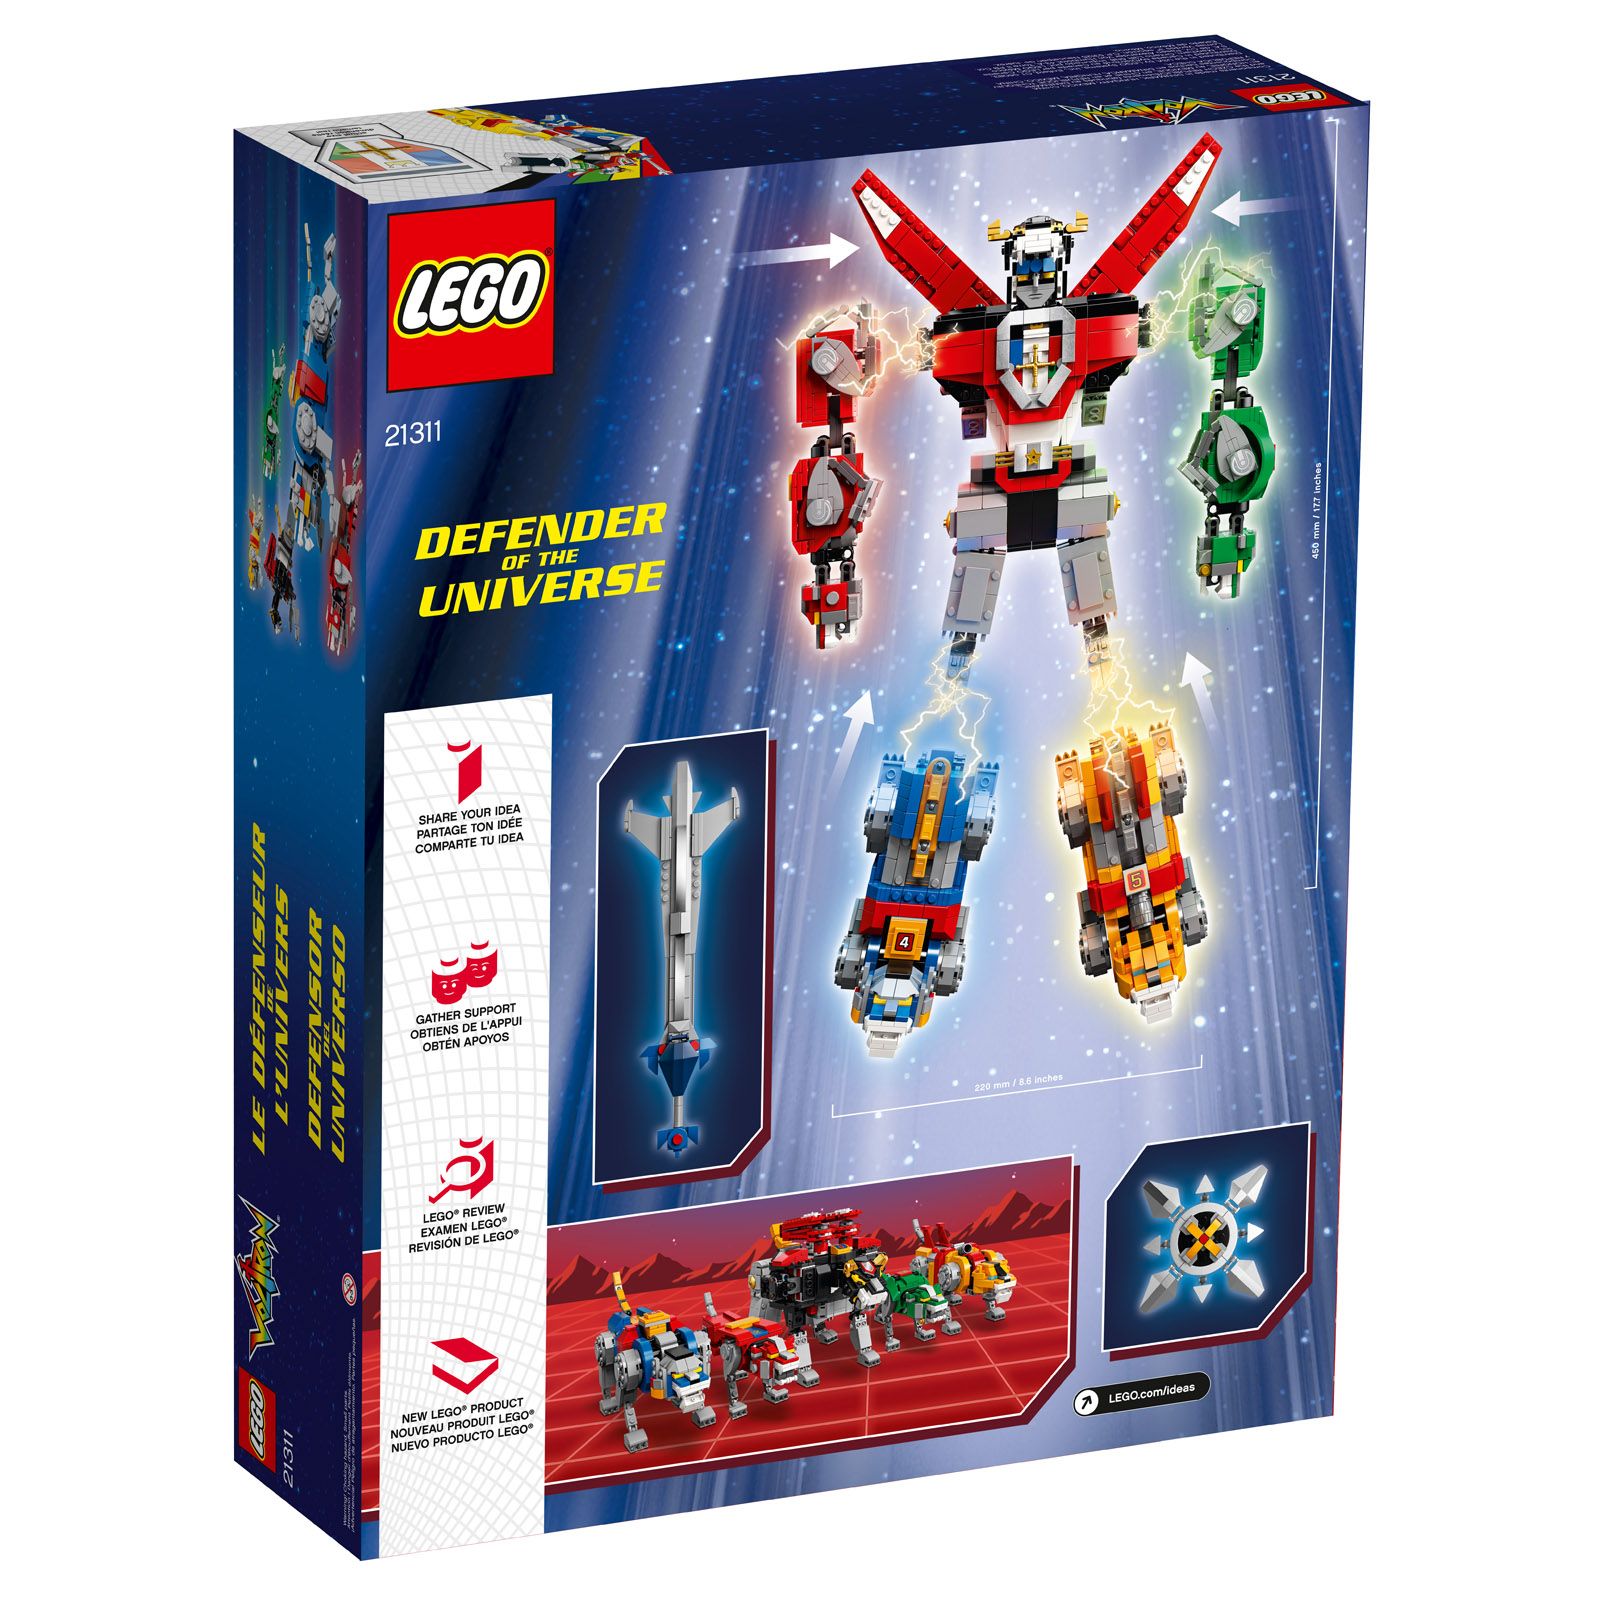 Voltron Legendary Defender Is The MustHave LEGO Set of 2018